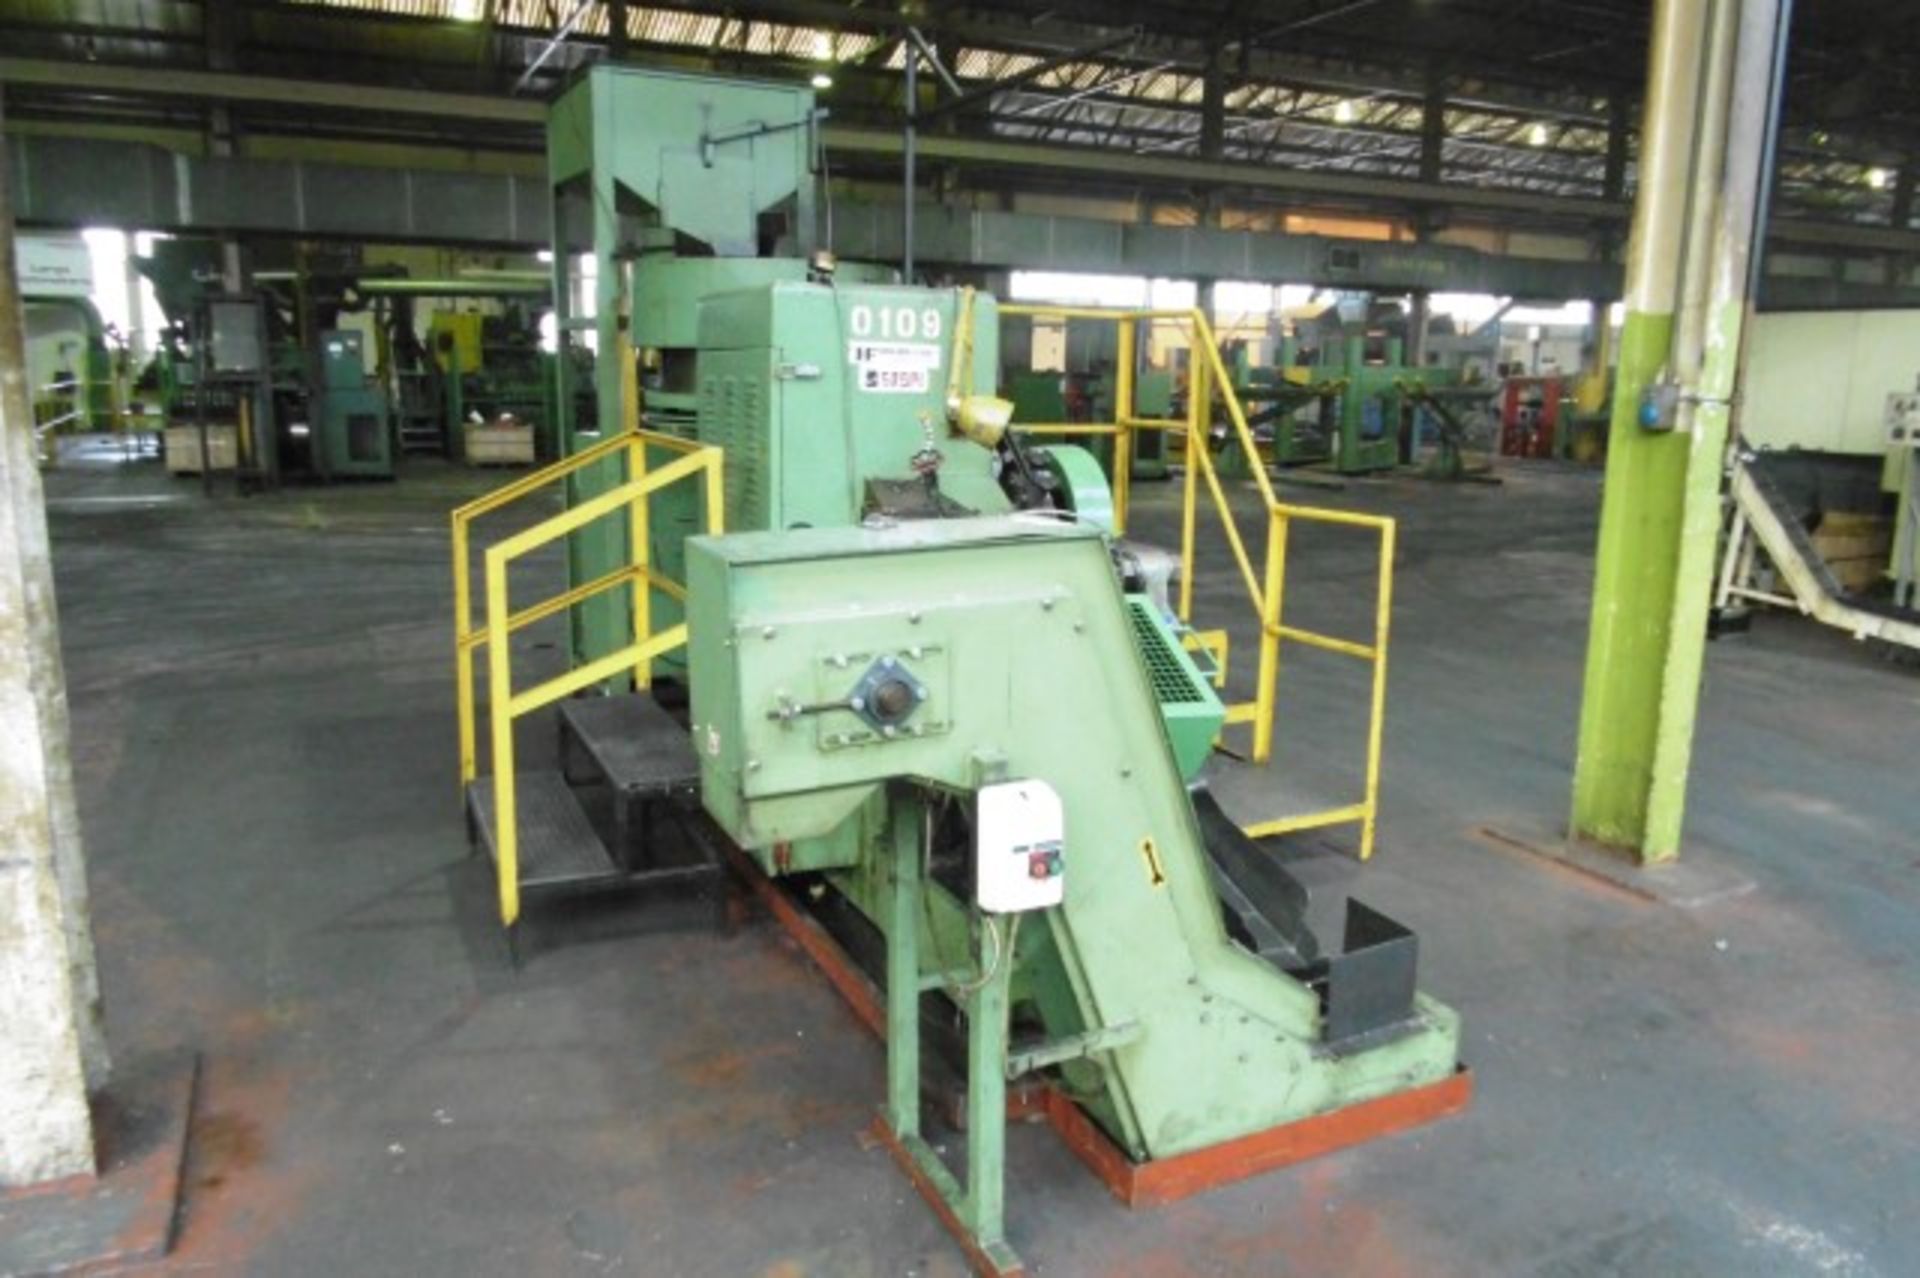 Saspi No 30 M12 thread roller, Serial No: 27-02-03, complete with vibratory hopper feed, vibratory - Image 2 of 4